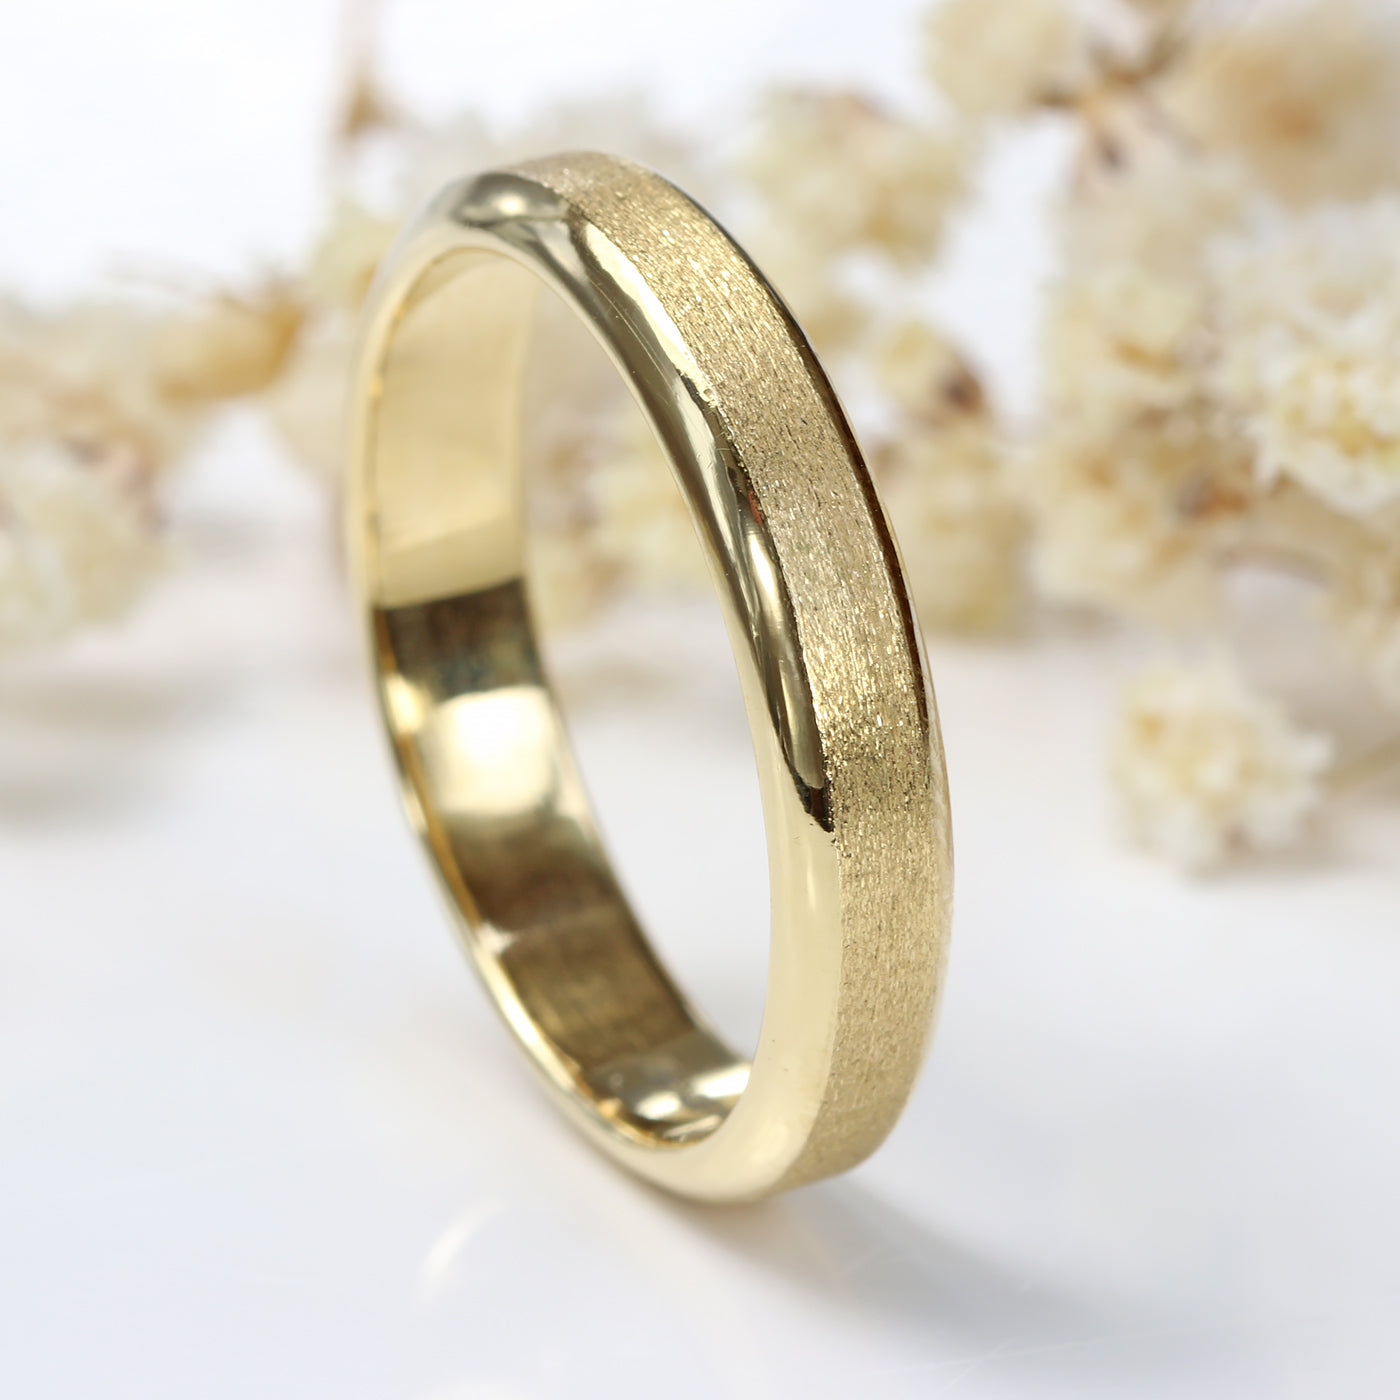 4mm Bevel Edged Wedding Ring in 18ct Yellow Gold – Size Q 1/2 (Resize G – R)